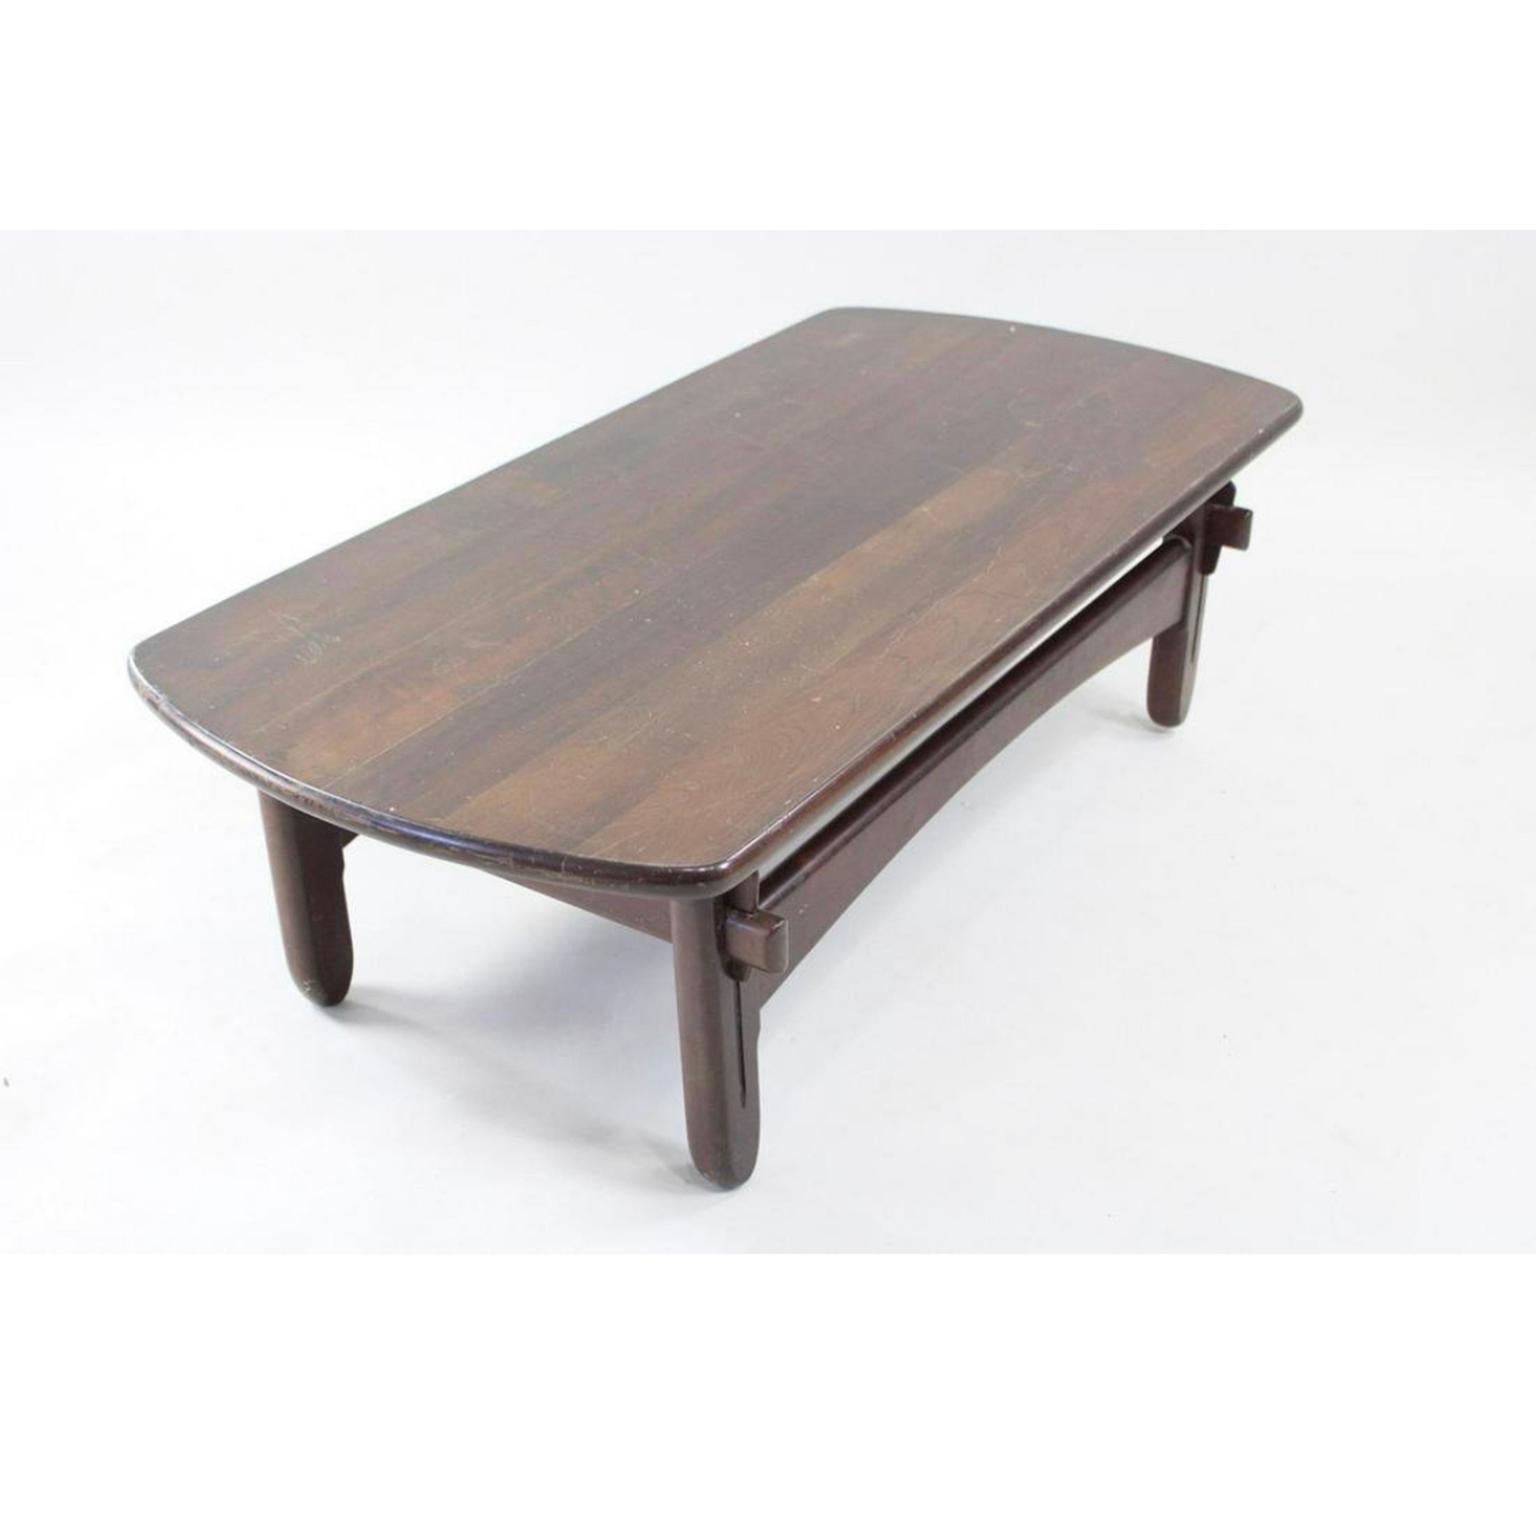 Rare Mid-Century Modern Sergio Rodrigues solid jacaranda wood coffee table. Beautiful design all solid wood very heavy and dense. Brazilian Mid-Century Modern design. Beautiful Table. Made in Brazil. Located in Brooklyn NYC.

Measures 47